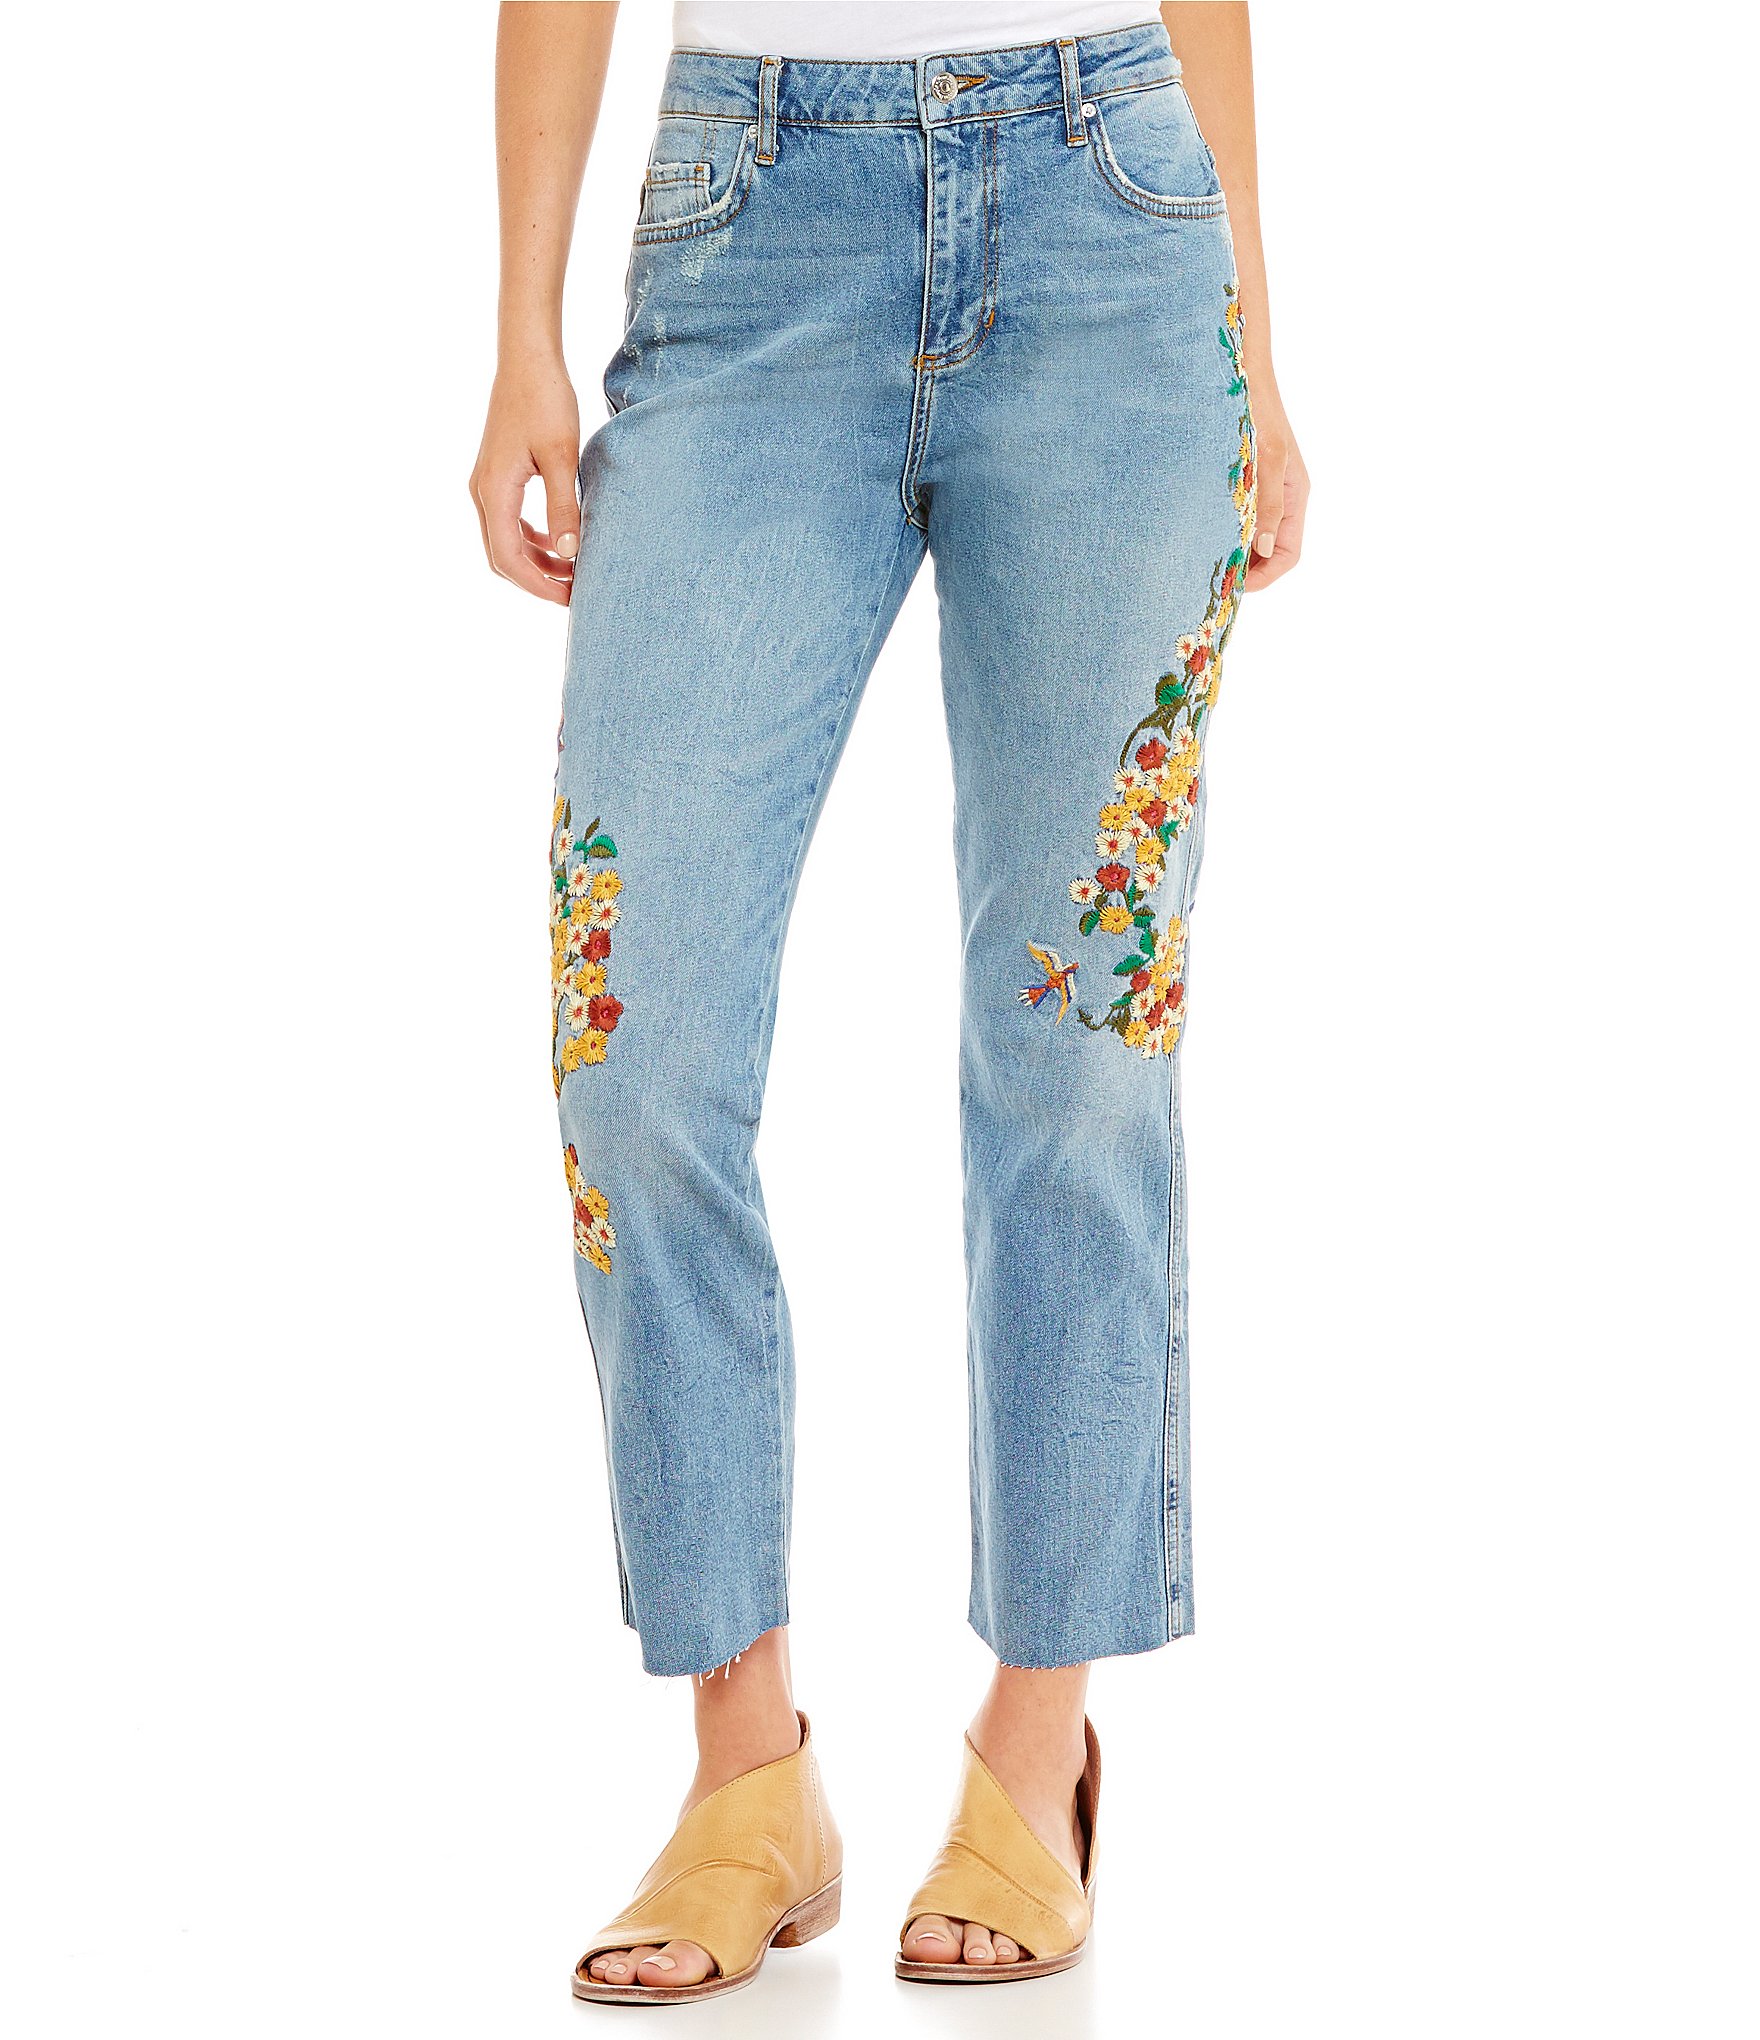 Free People Floral Embroidered Girlfriend Jeans | Dillards